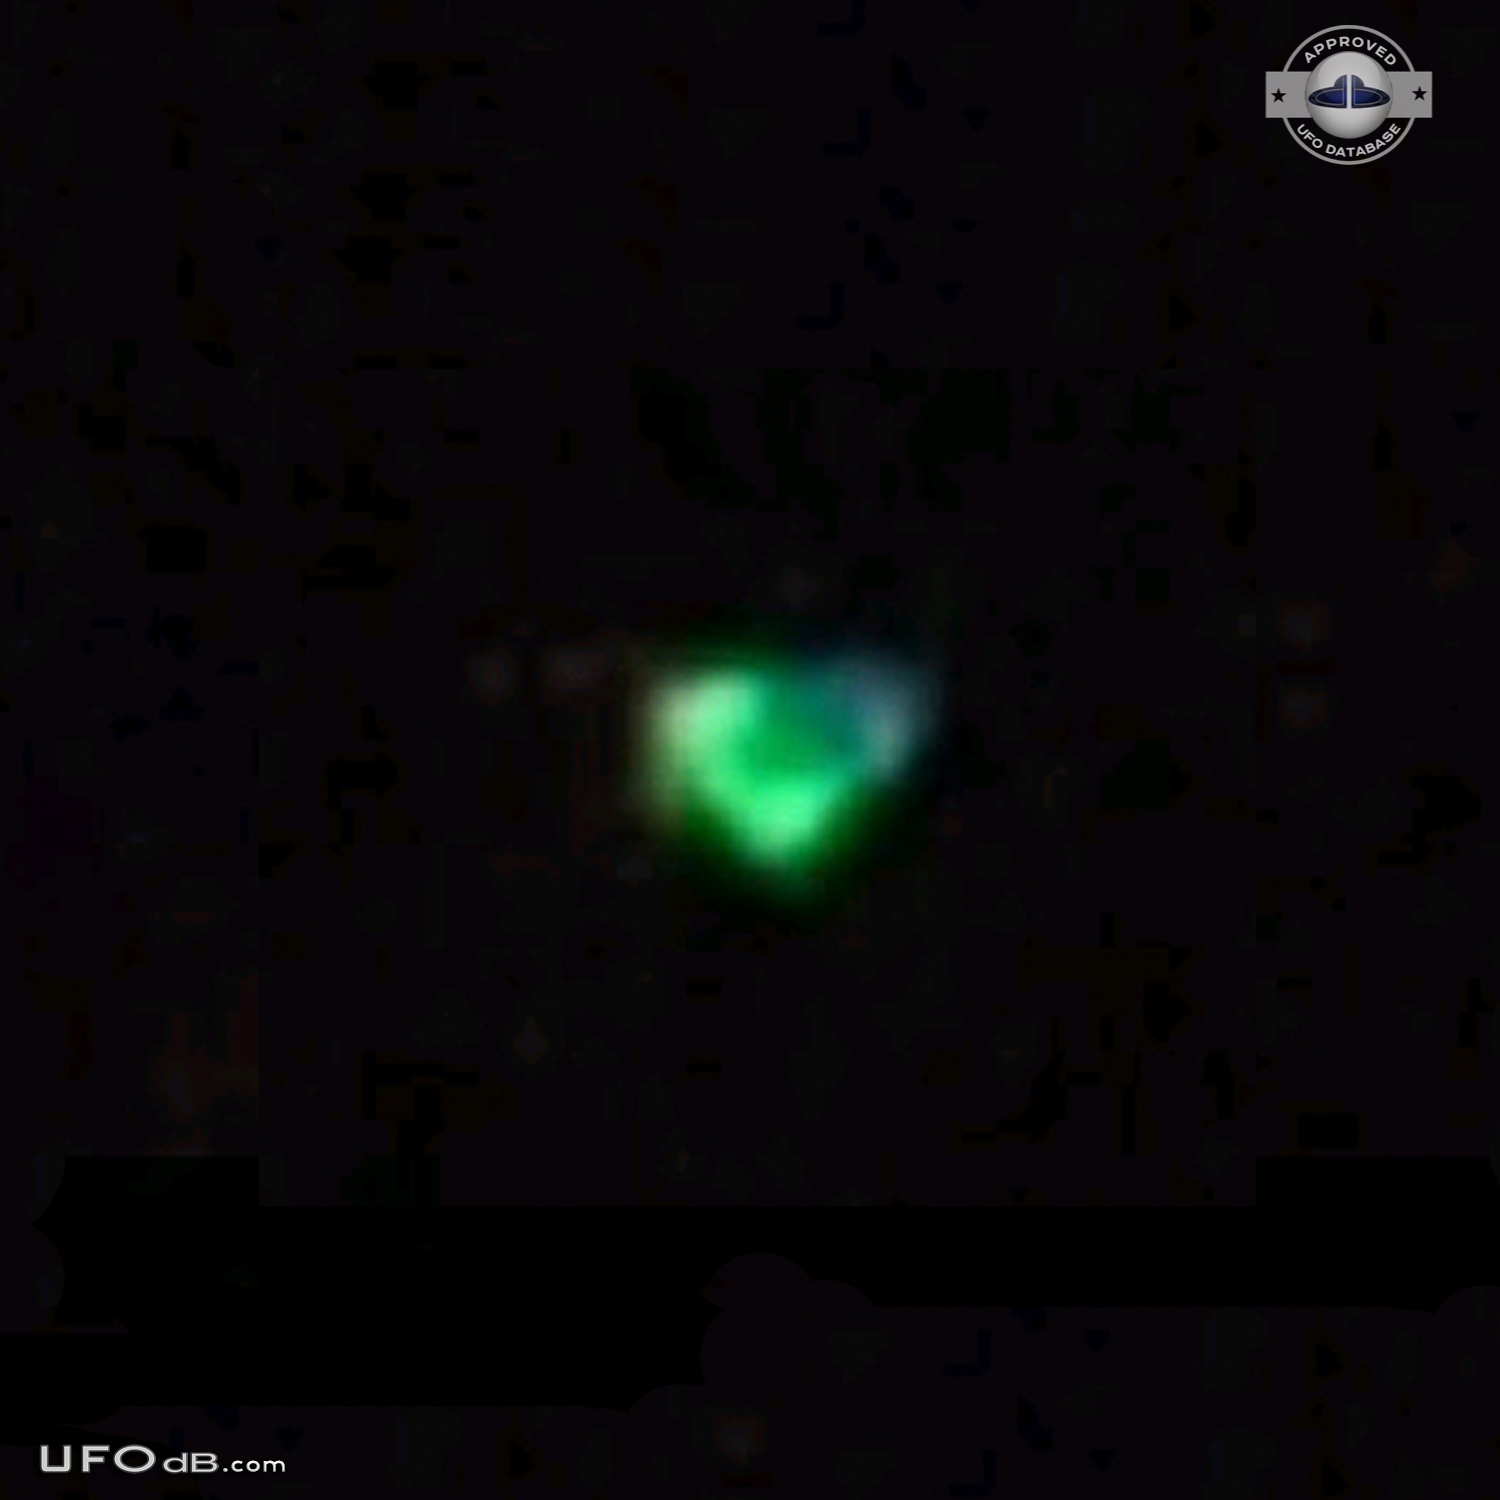 UFOs twinkling of many colors makes the News in Hecker Illinois 2012 UFO Picture #512-2